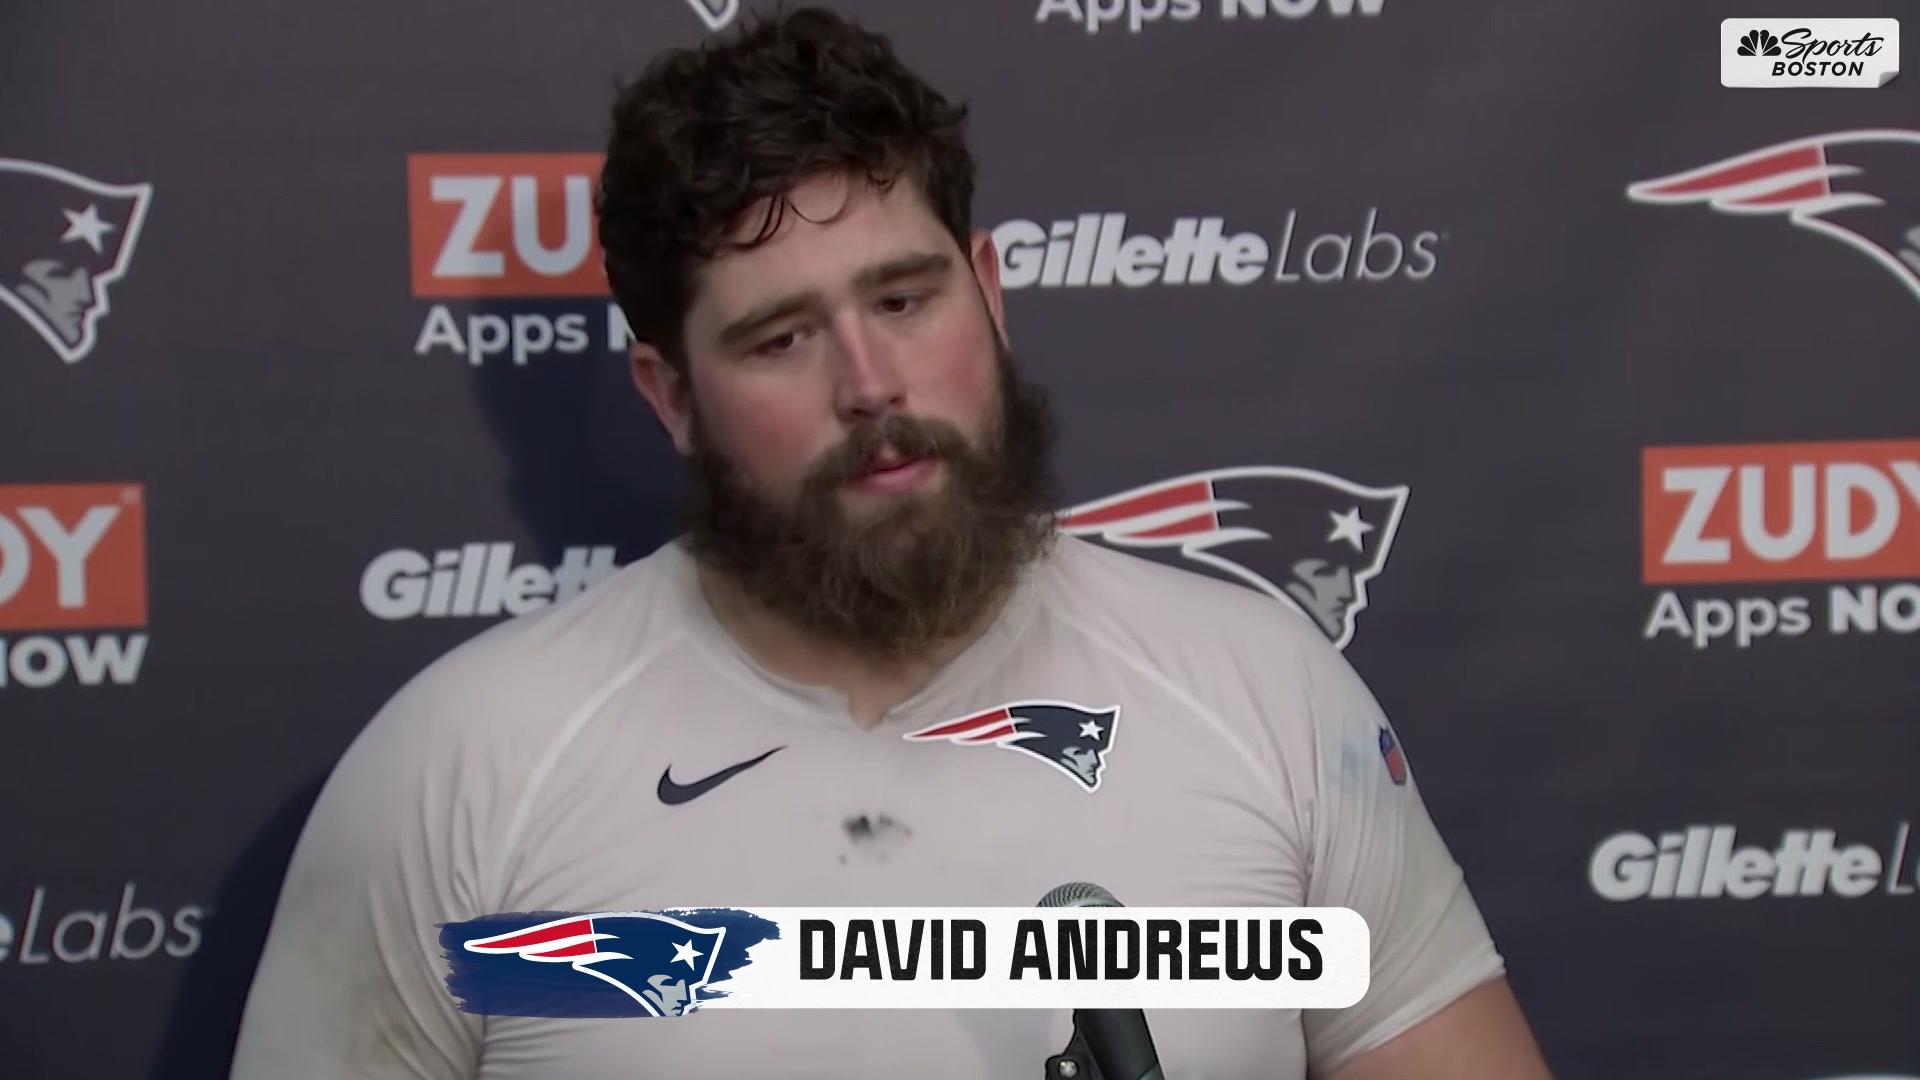 David Andrews on team's mentality: “It's a one-game season” – NBC